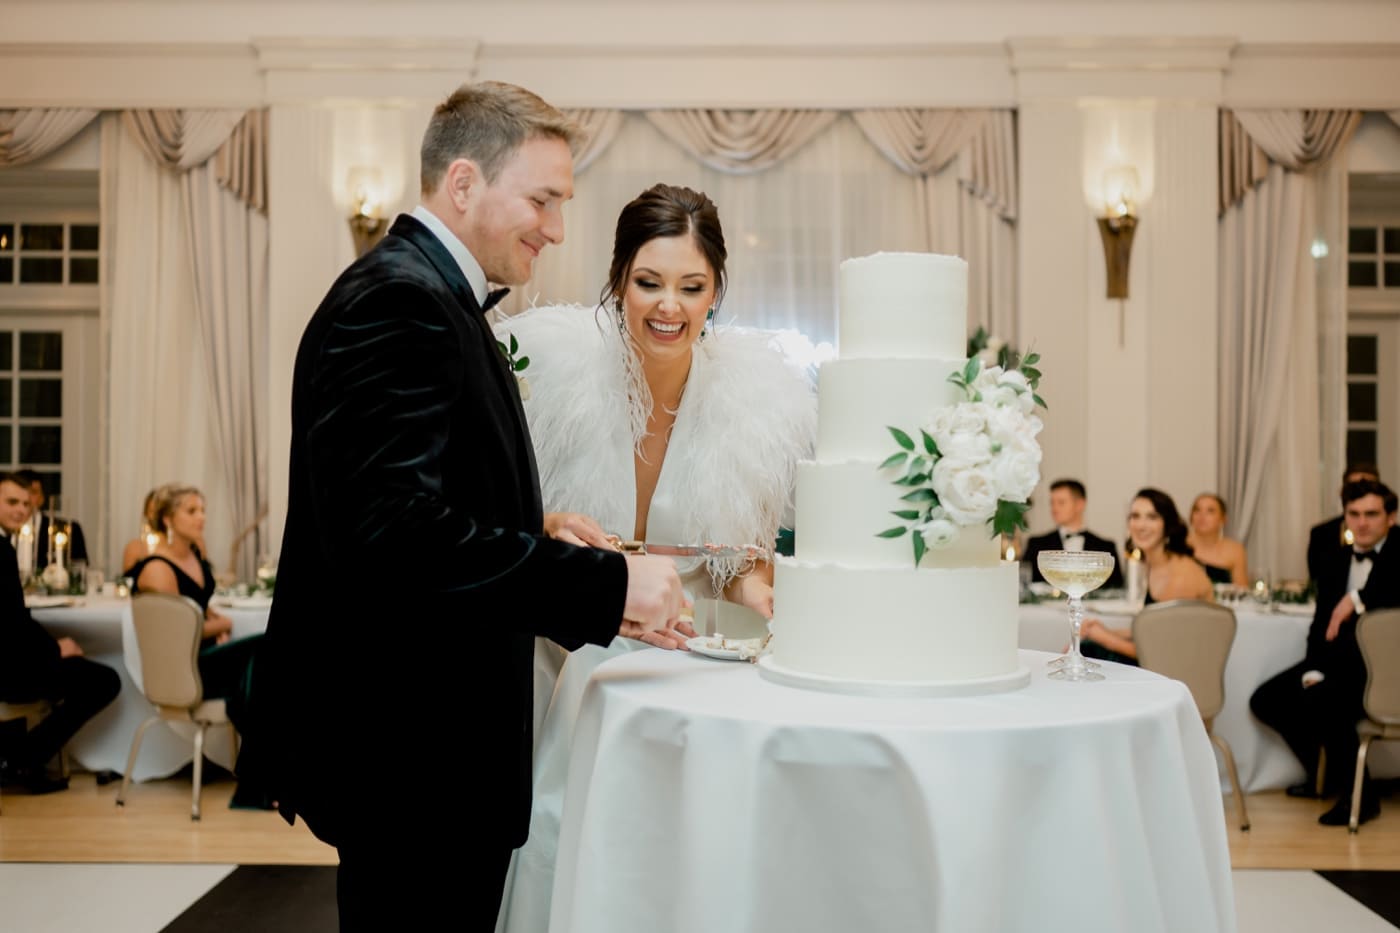 cake cutting hotel fort des moines wedding